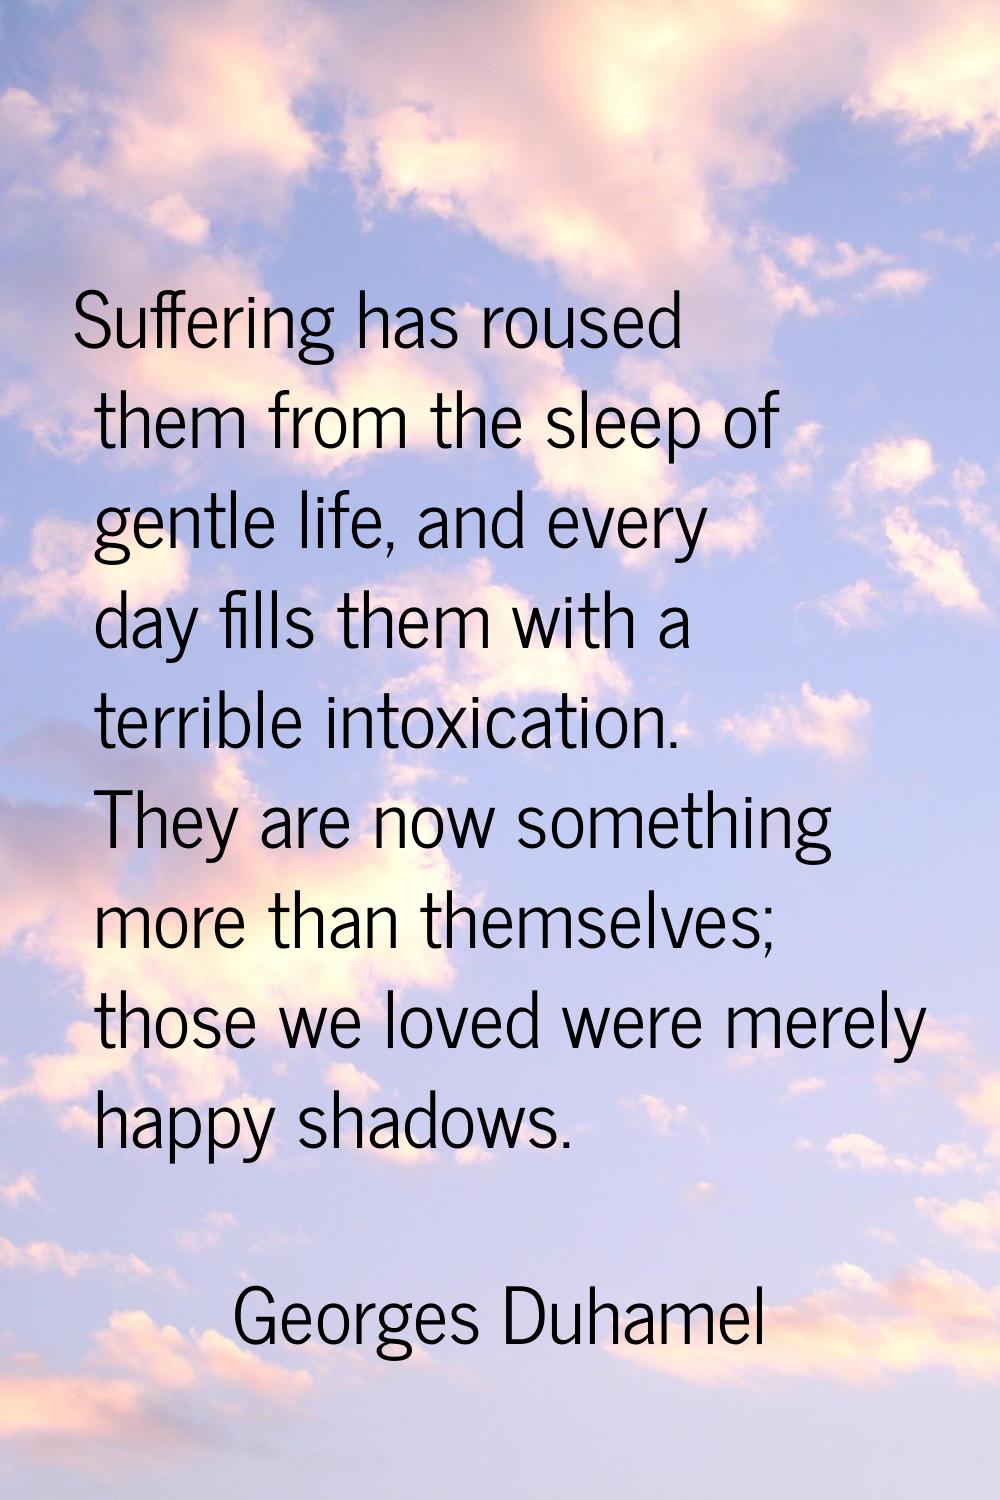 Suffering has roused them from the sleep of gentle life, and every day fills them with a terrible i